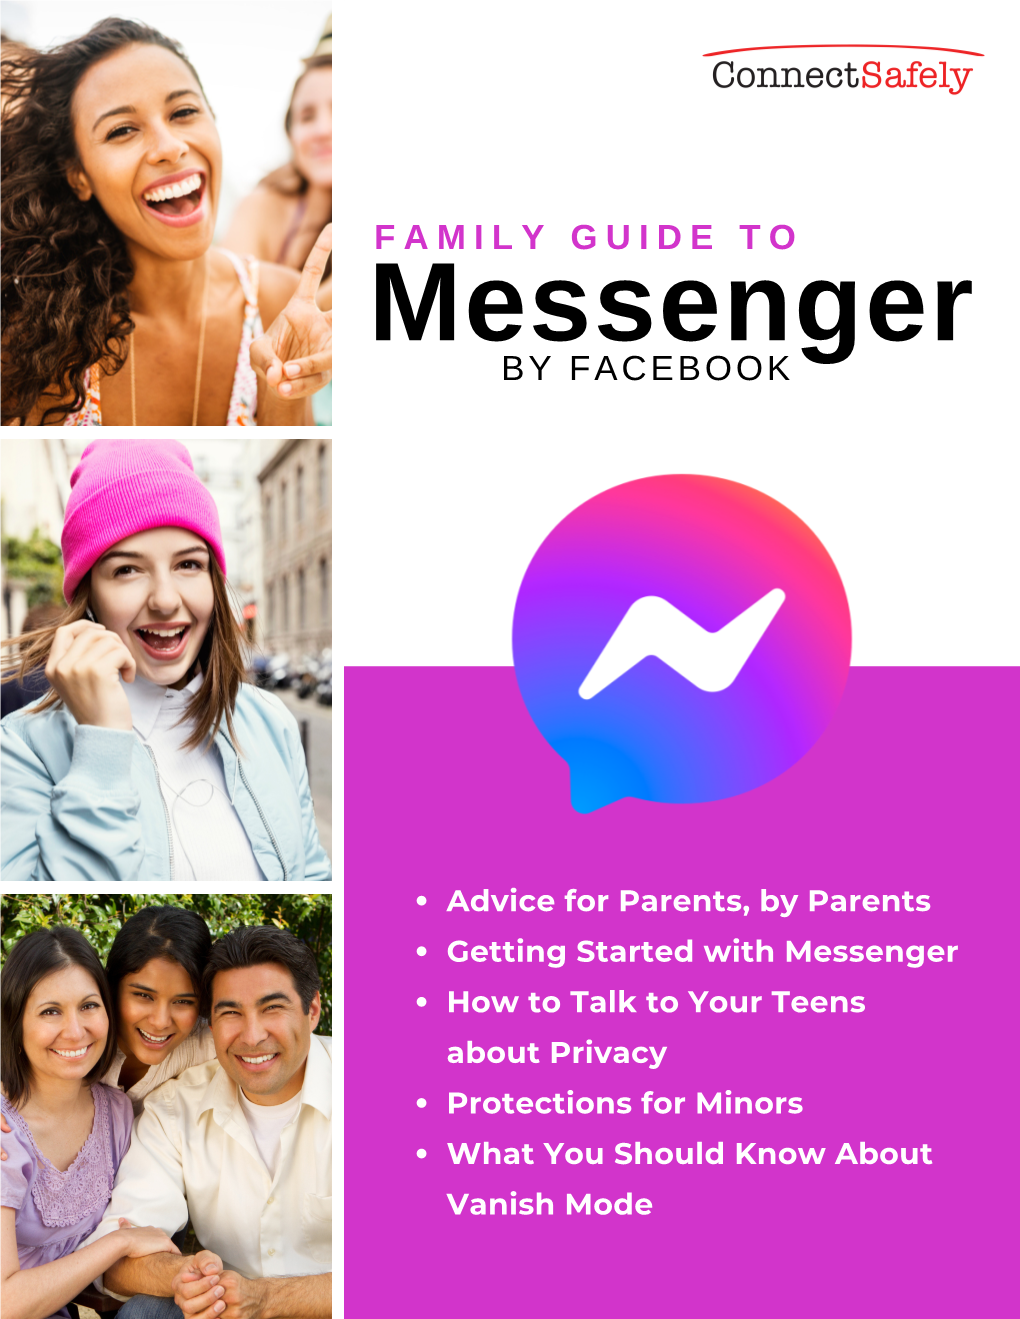 Family Guide to Messenger by Facebook